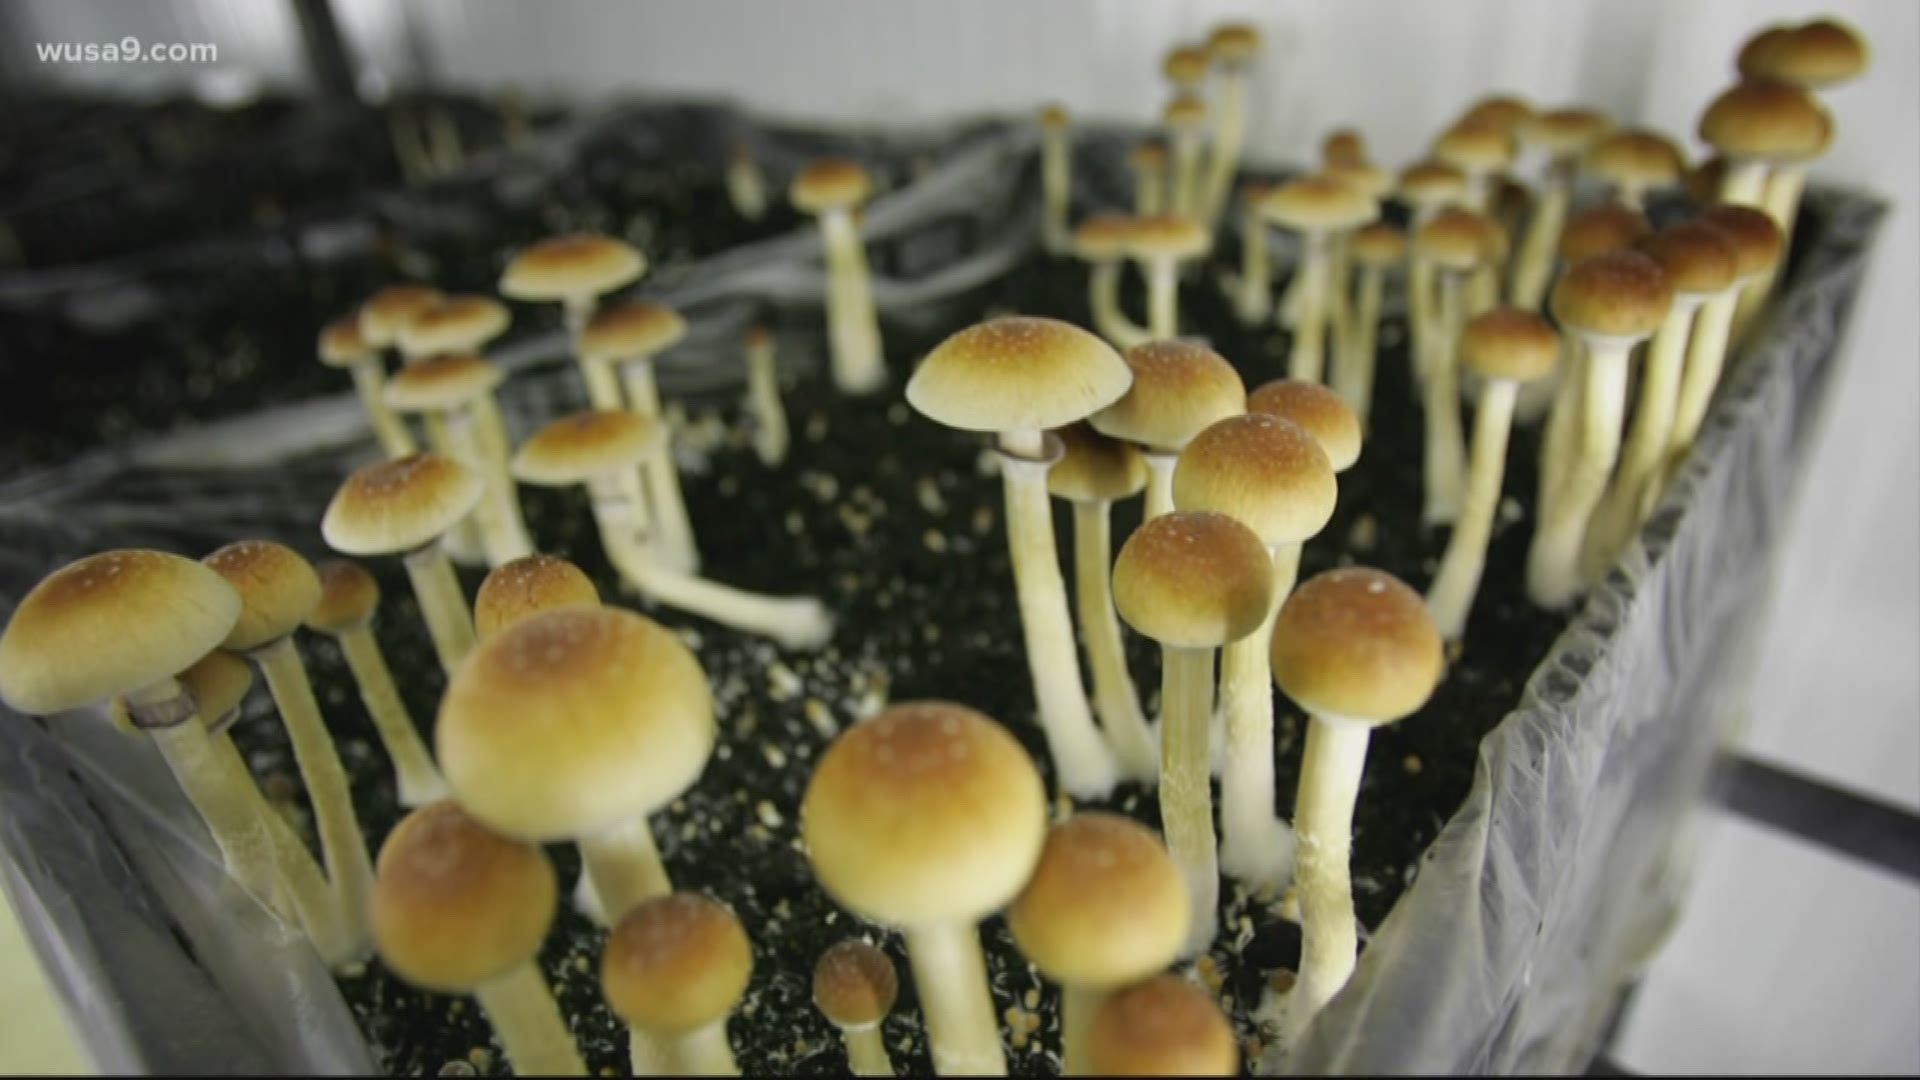 Buy Shrooms DC: Tips for Responsible Use and Integration